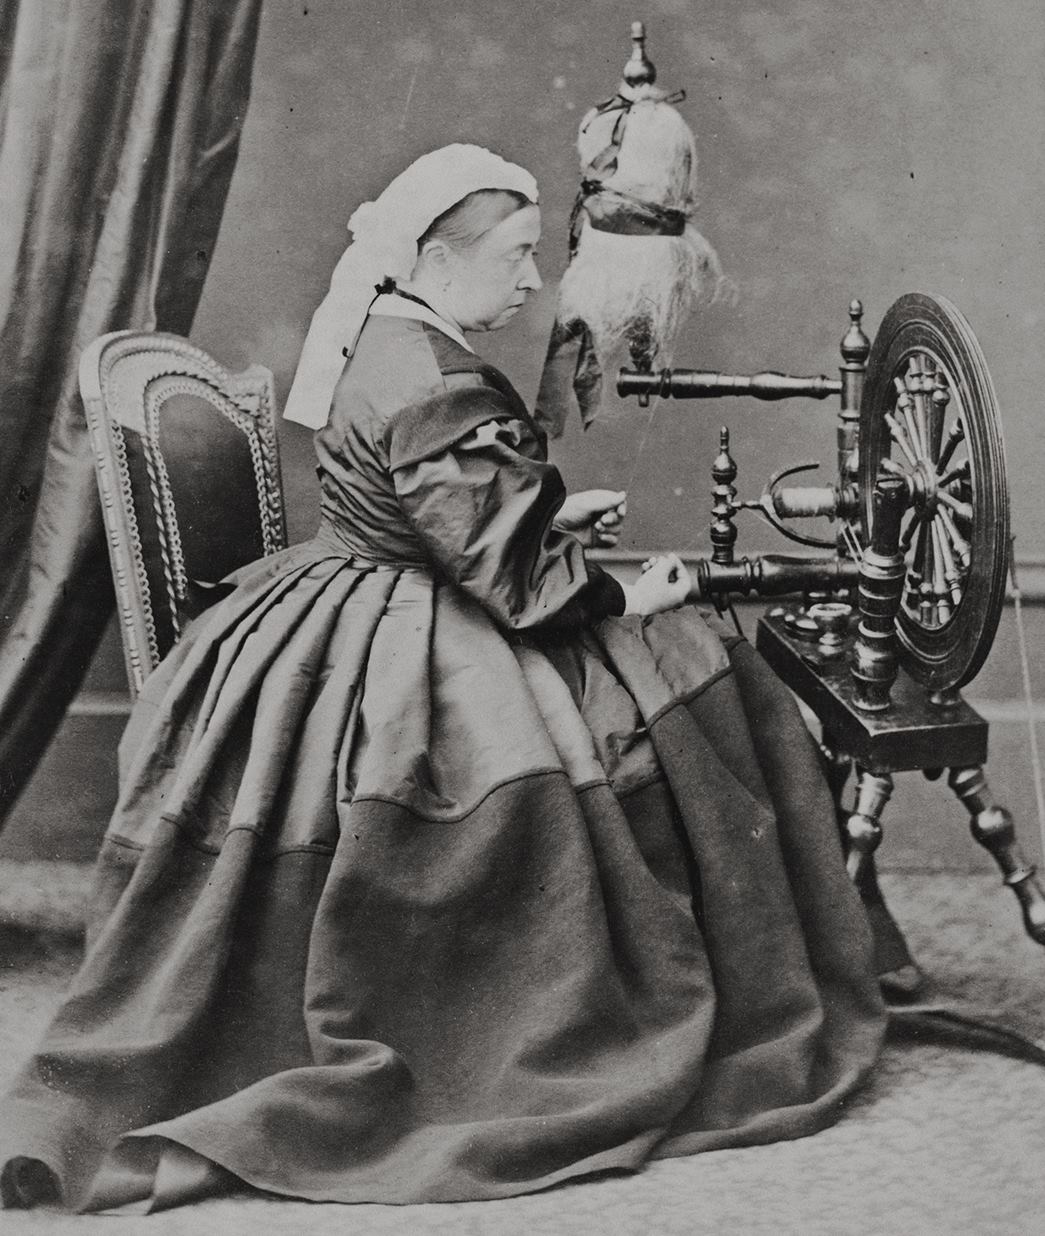 Queen Victoria at a spinning wheel, April 1865
Queen Victoria seated and holding thread which she spins on a spinning wheel. She mentions the photo being taken in her journal on 4 April 1865. (Courtesy Royal Collection Trust / © His Majesty King Charles III 2023)
